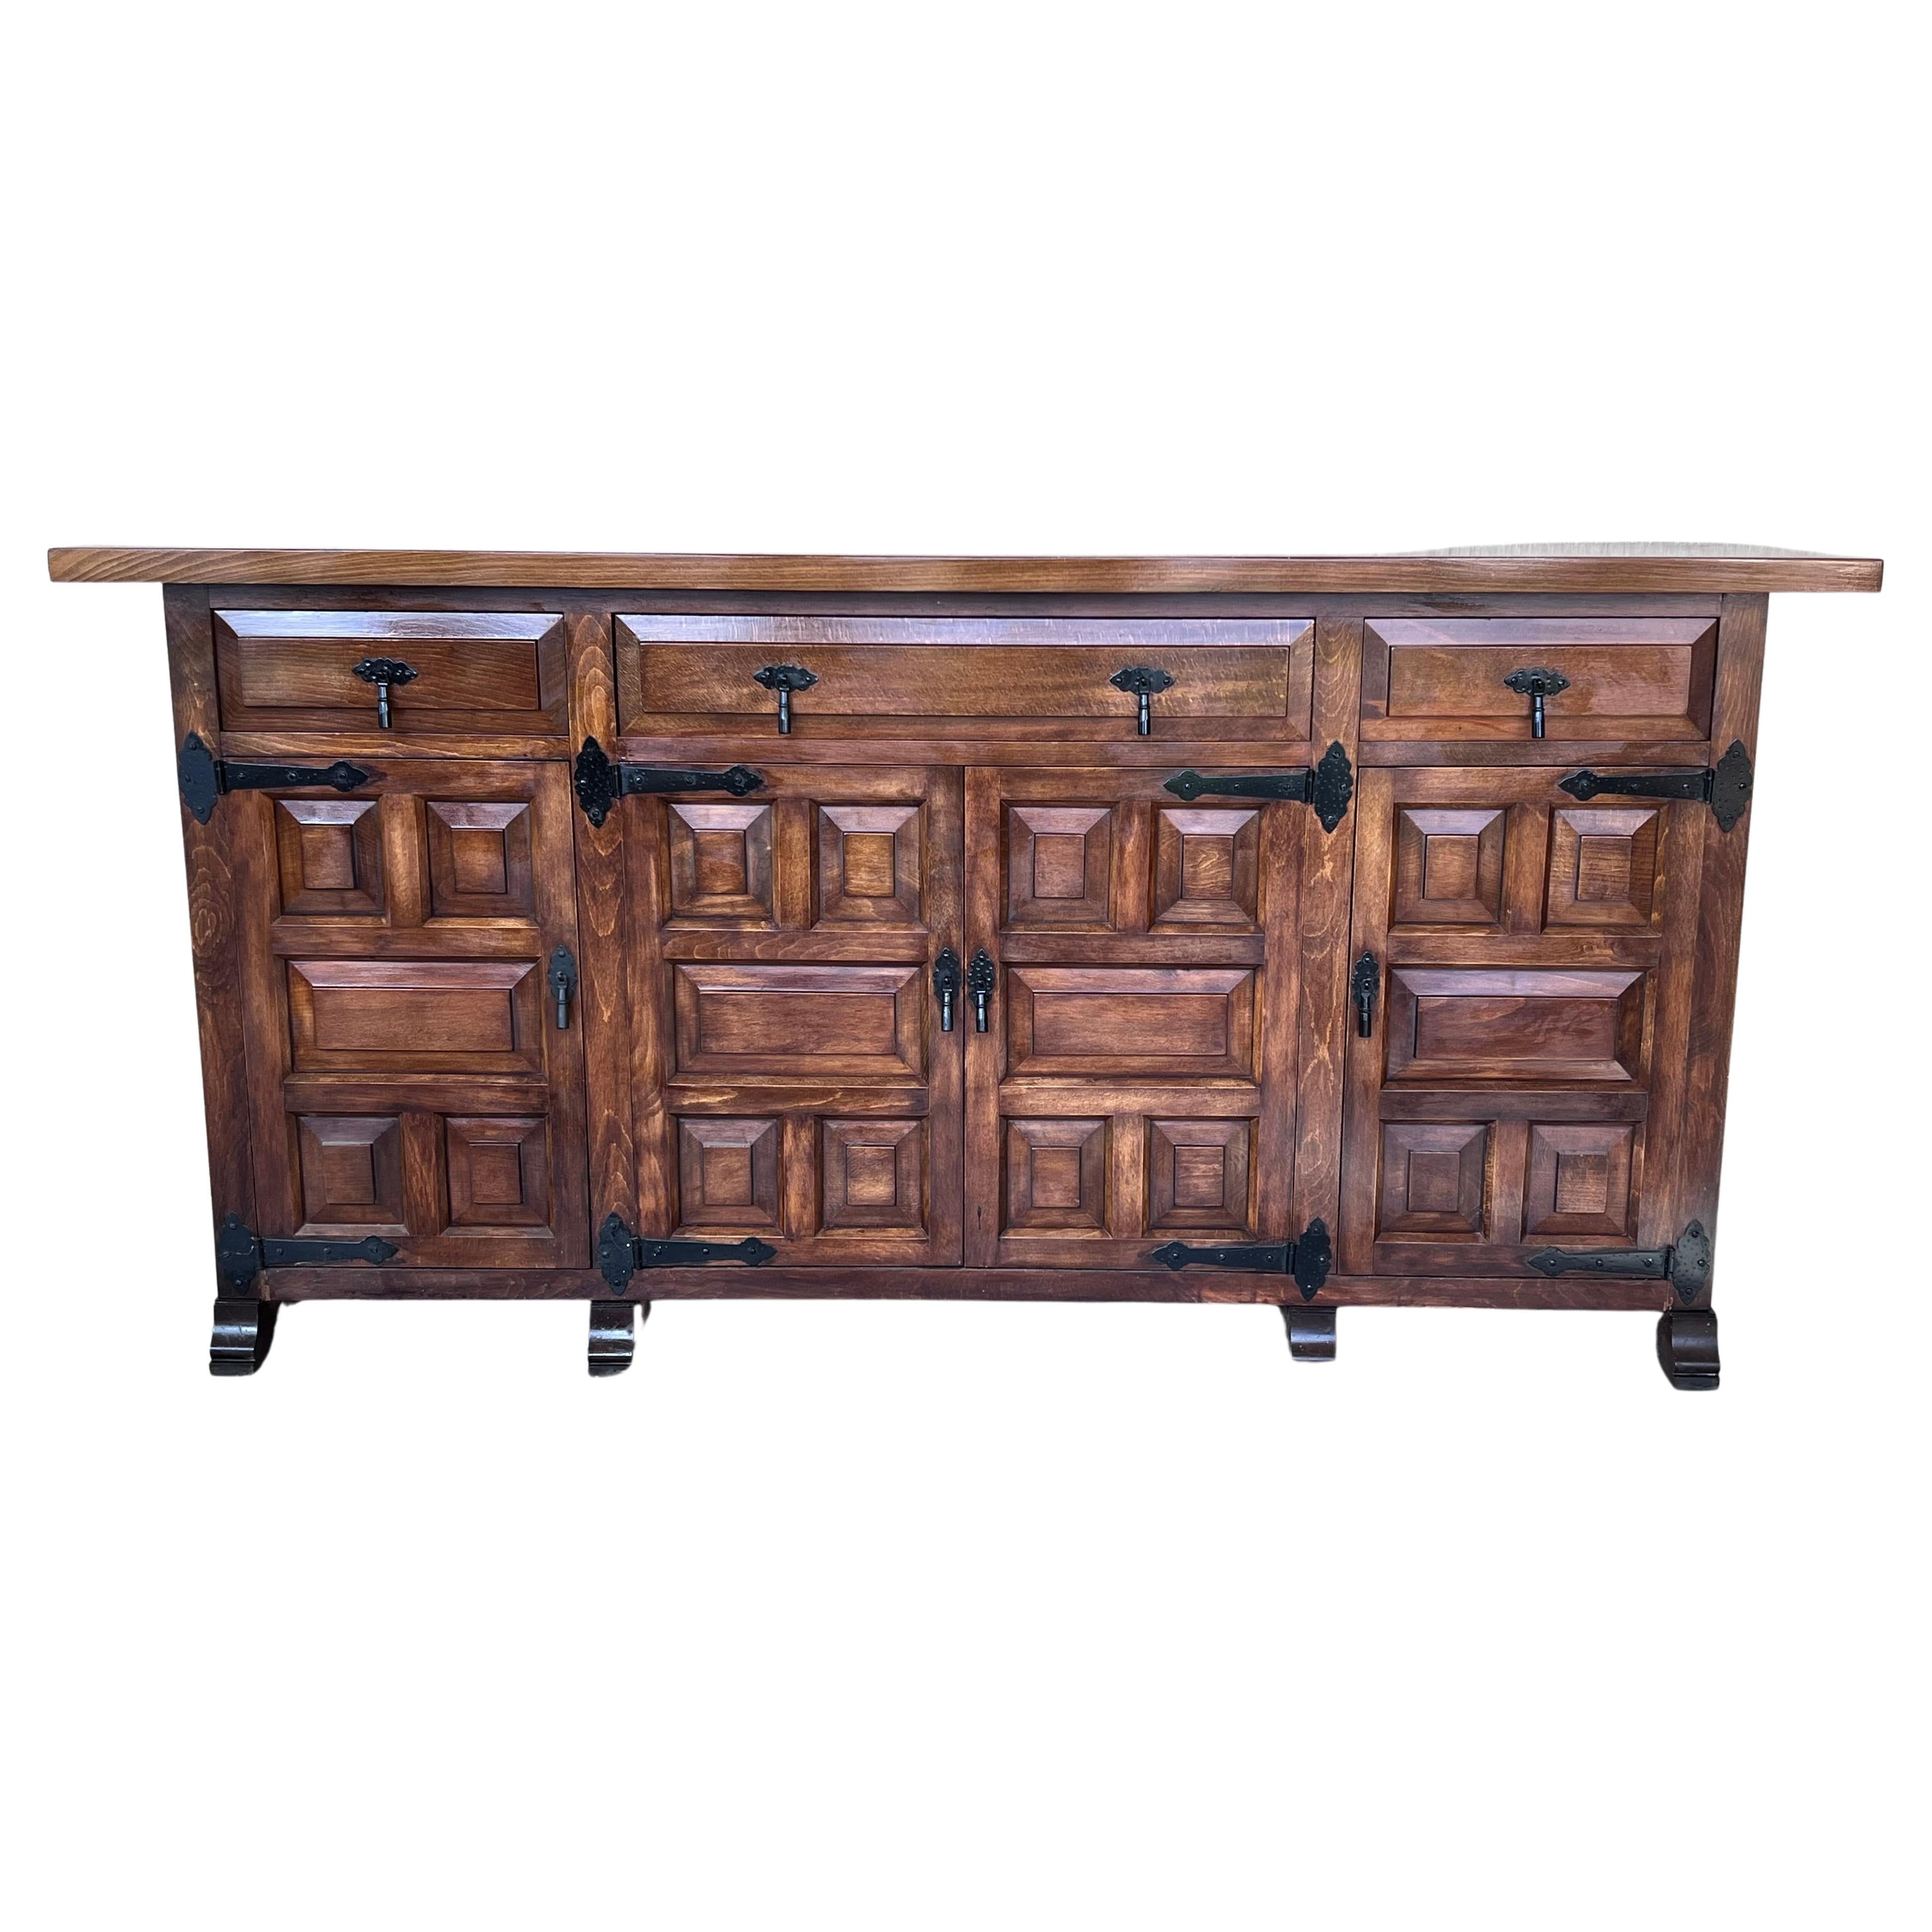 19th Century Large Catalan Spanish Baroque Carved Oak Tuscan Credenza or Buffet For Sale